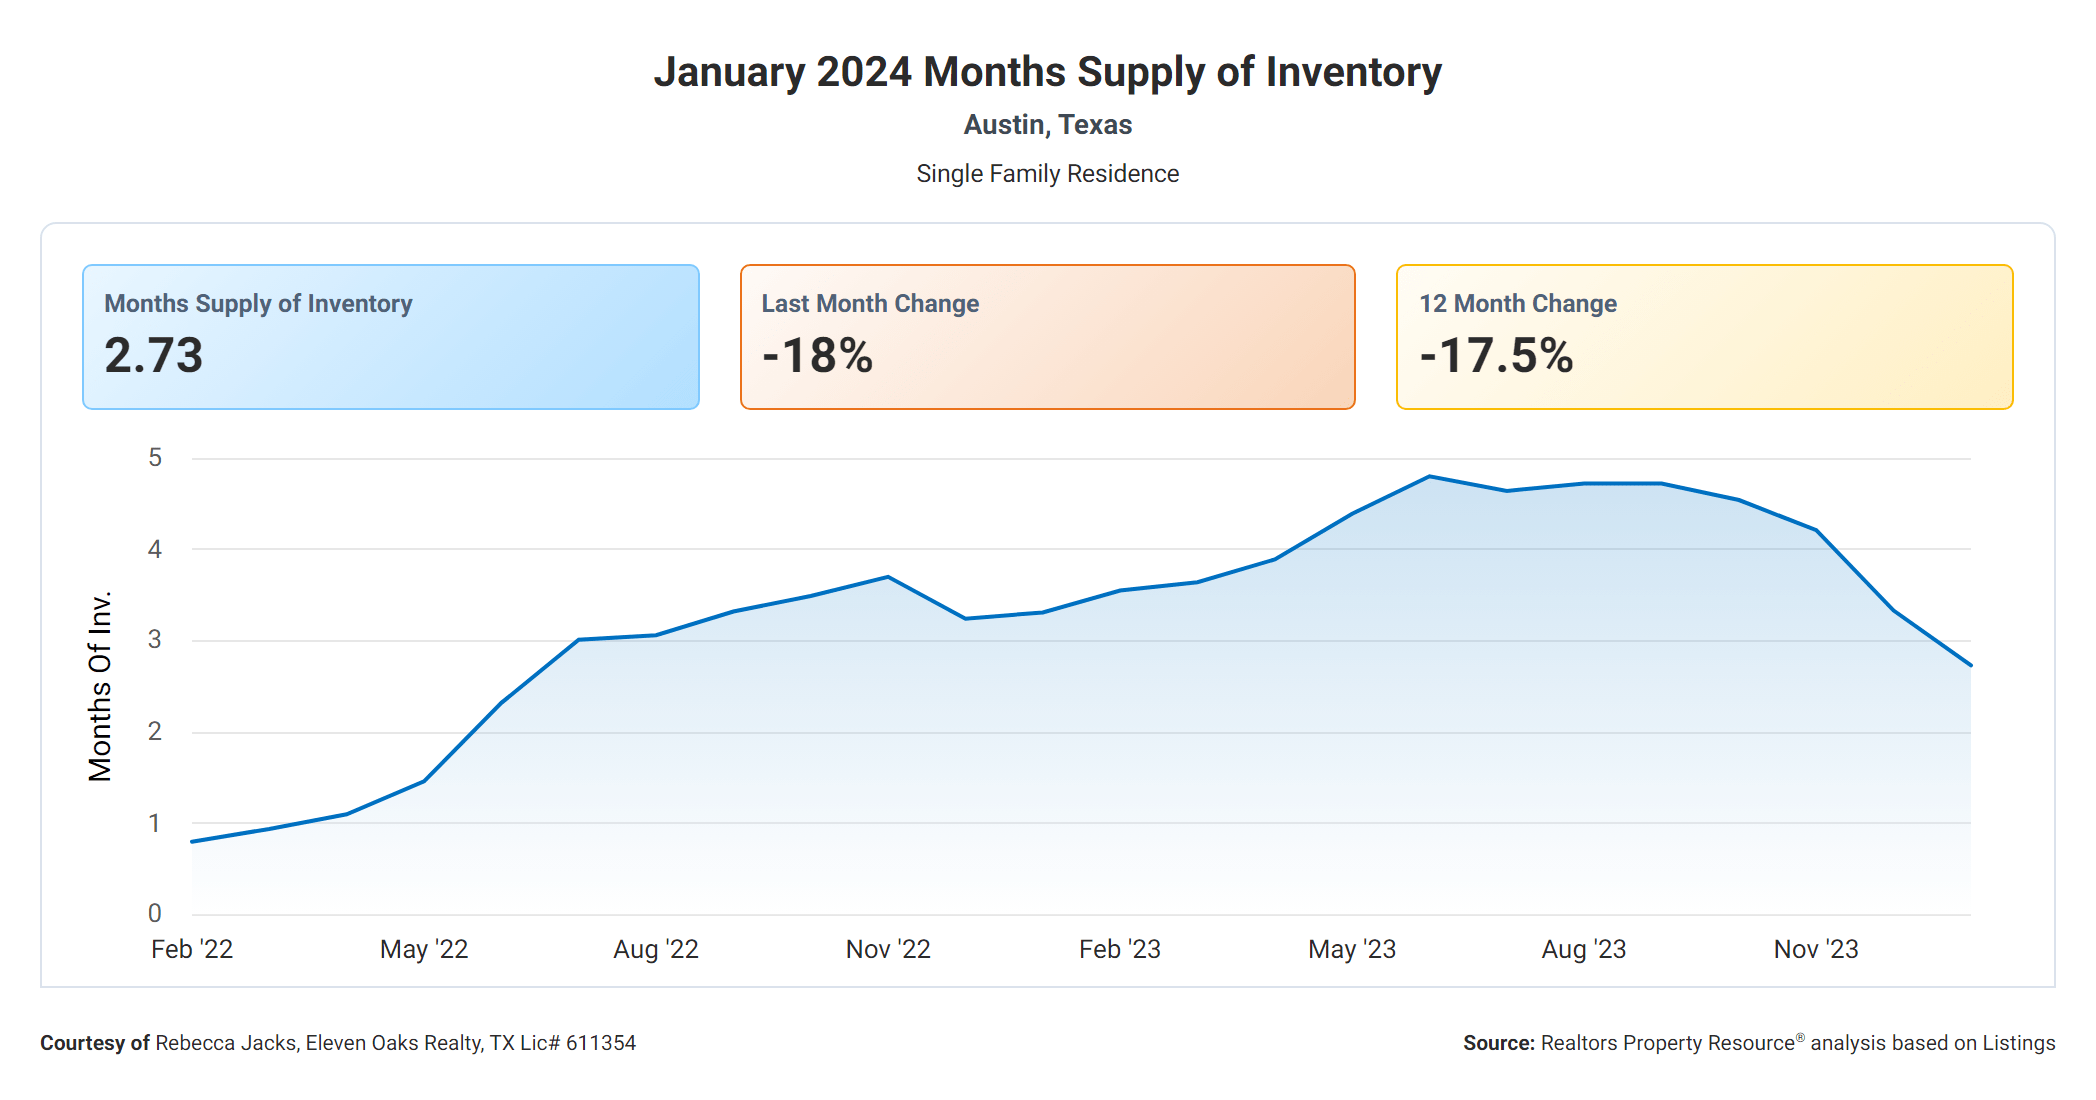 January 2024 Austin months supply of inventory